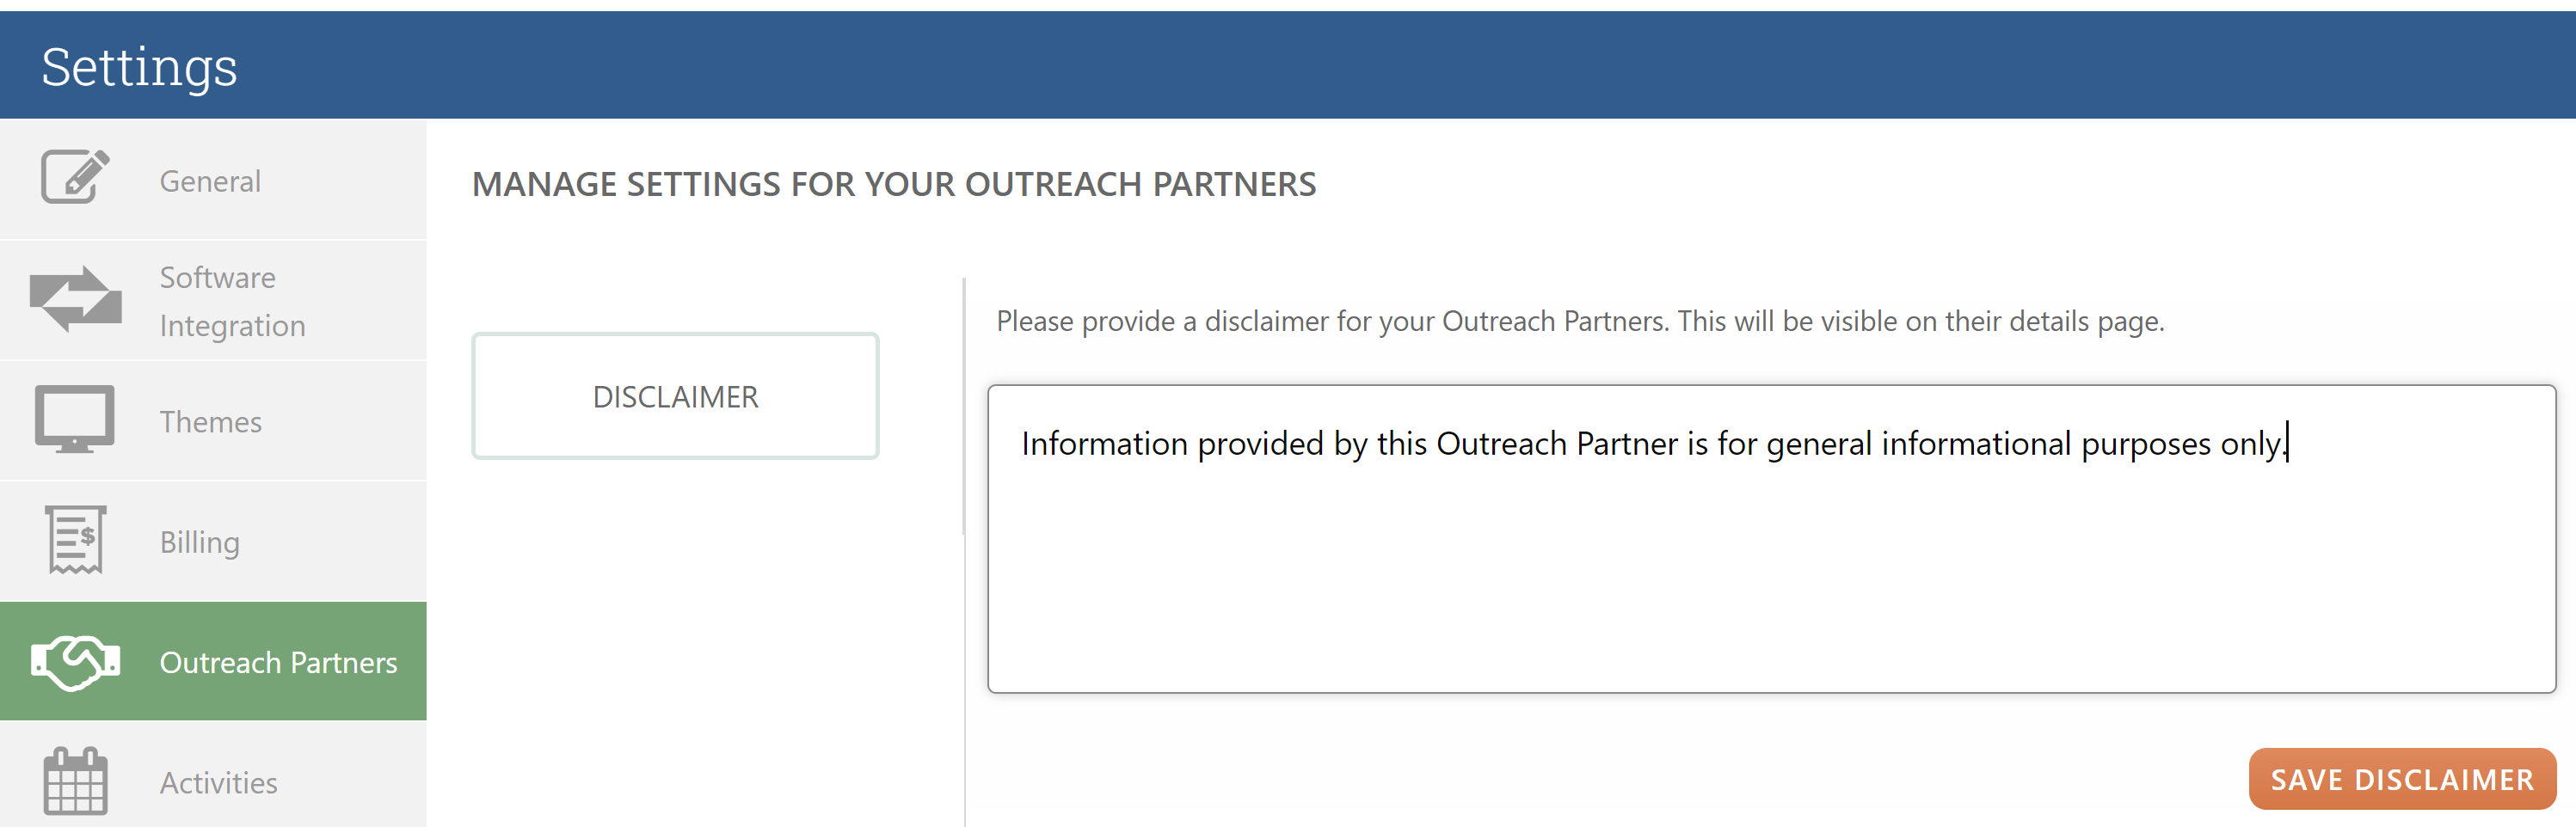 The Outreach Partners screen.